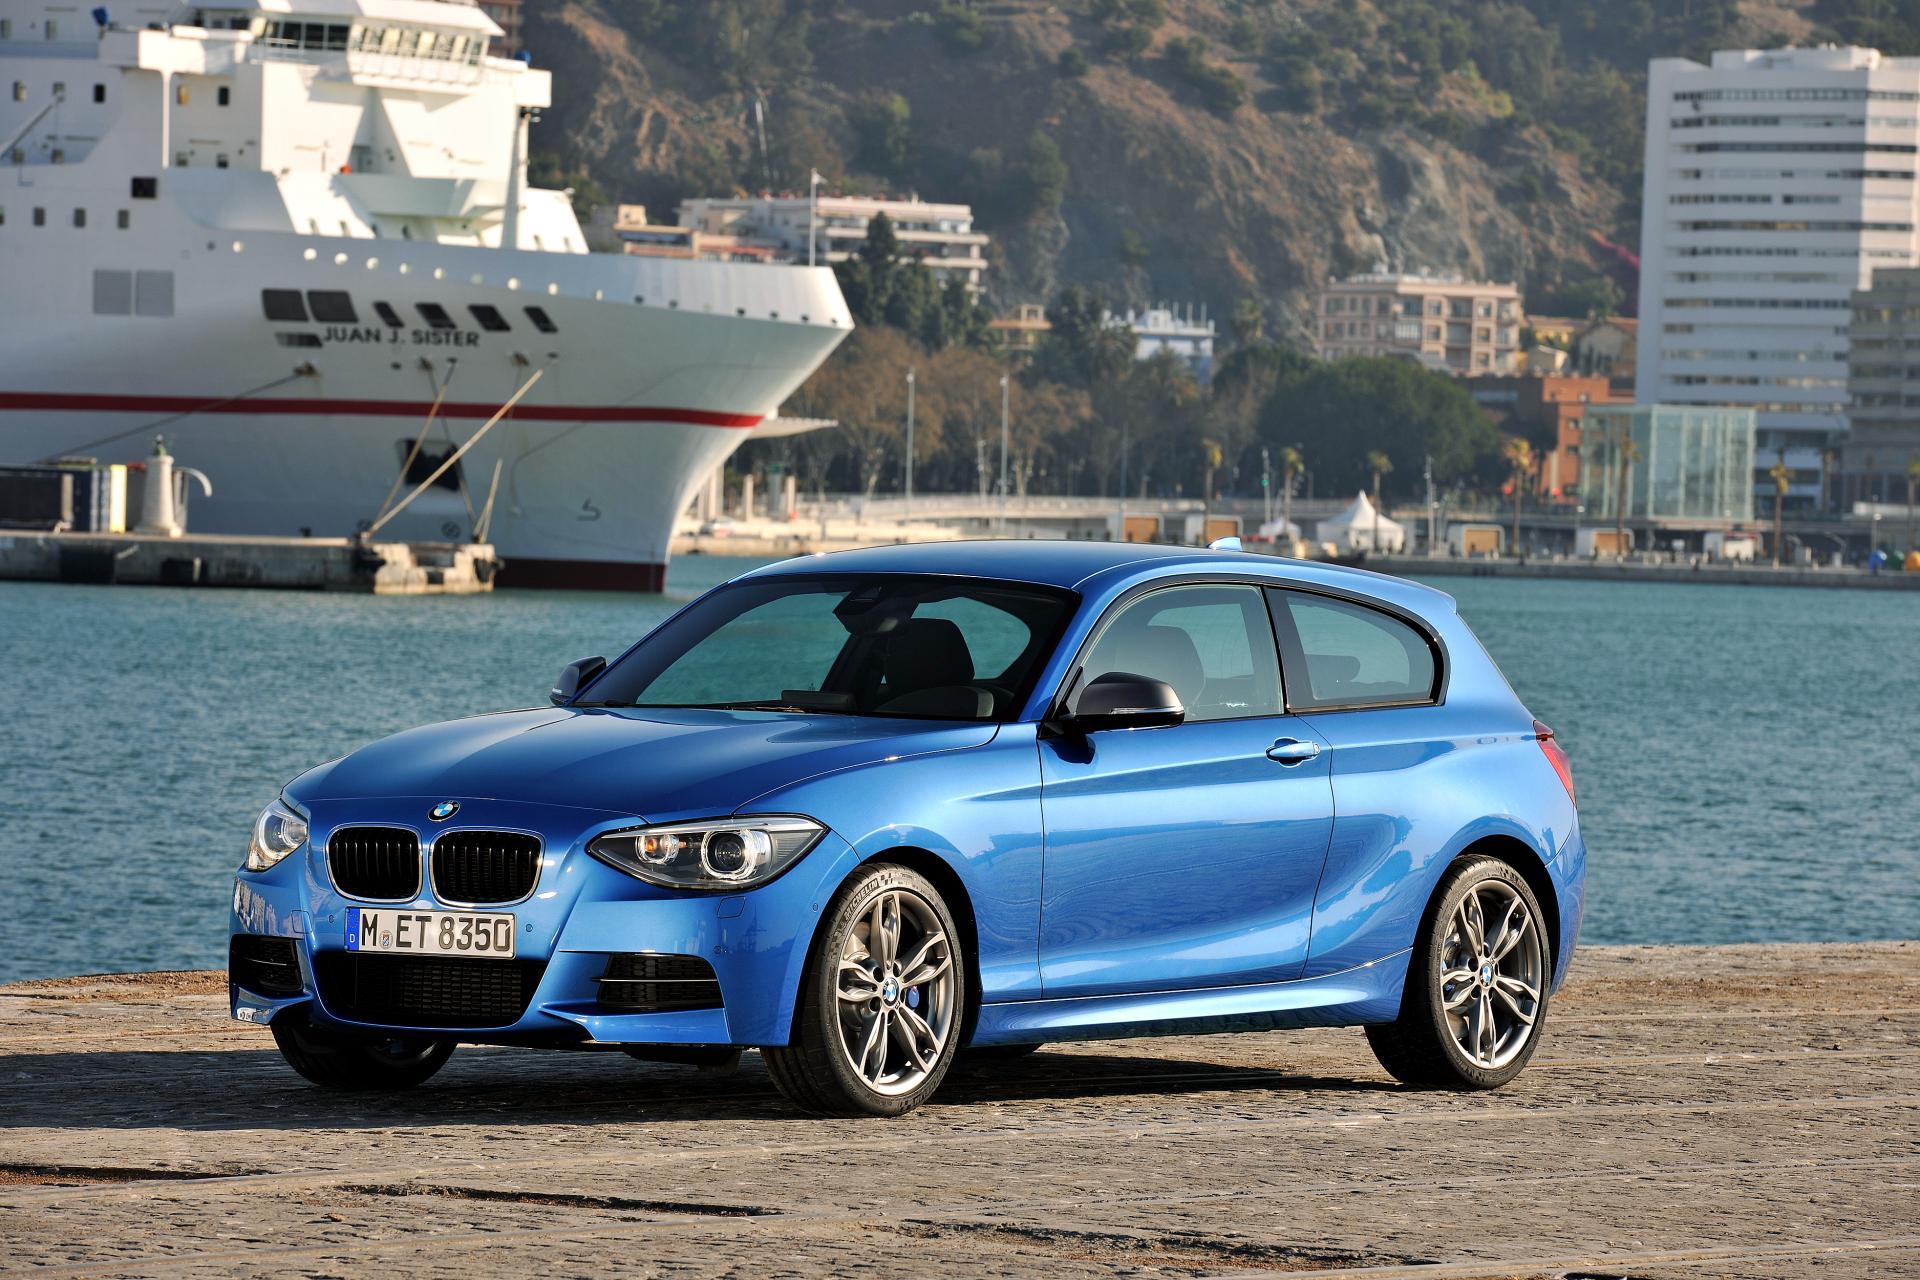 BMW M135i Wallpaper and Image Gallery